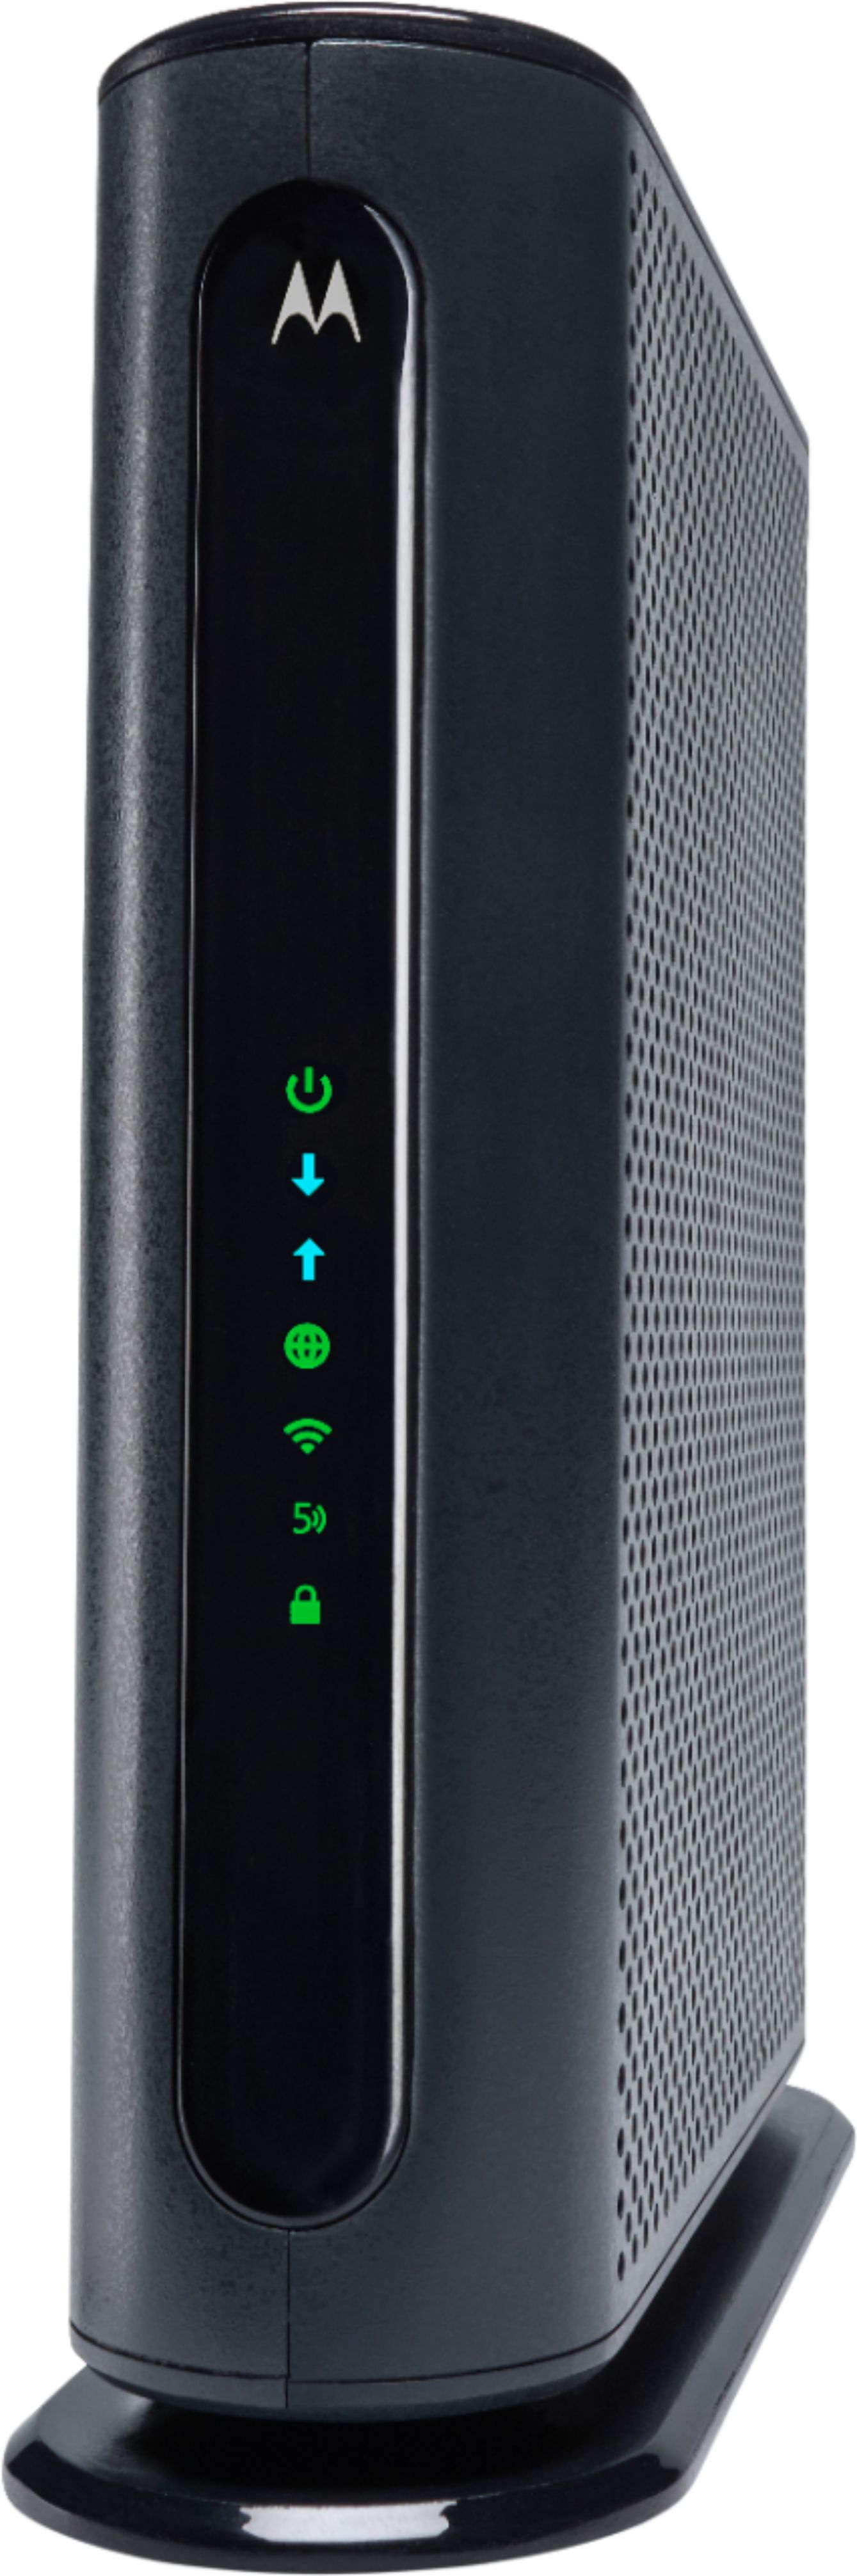 Motorola Ac Dual Band Wi Fi Router With 16 X 4 Modem Black Mg7540 Best Buy